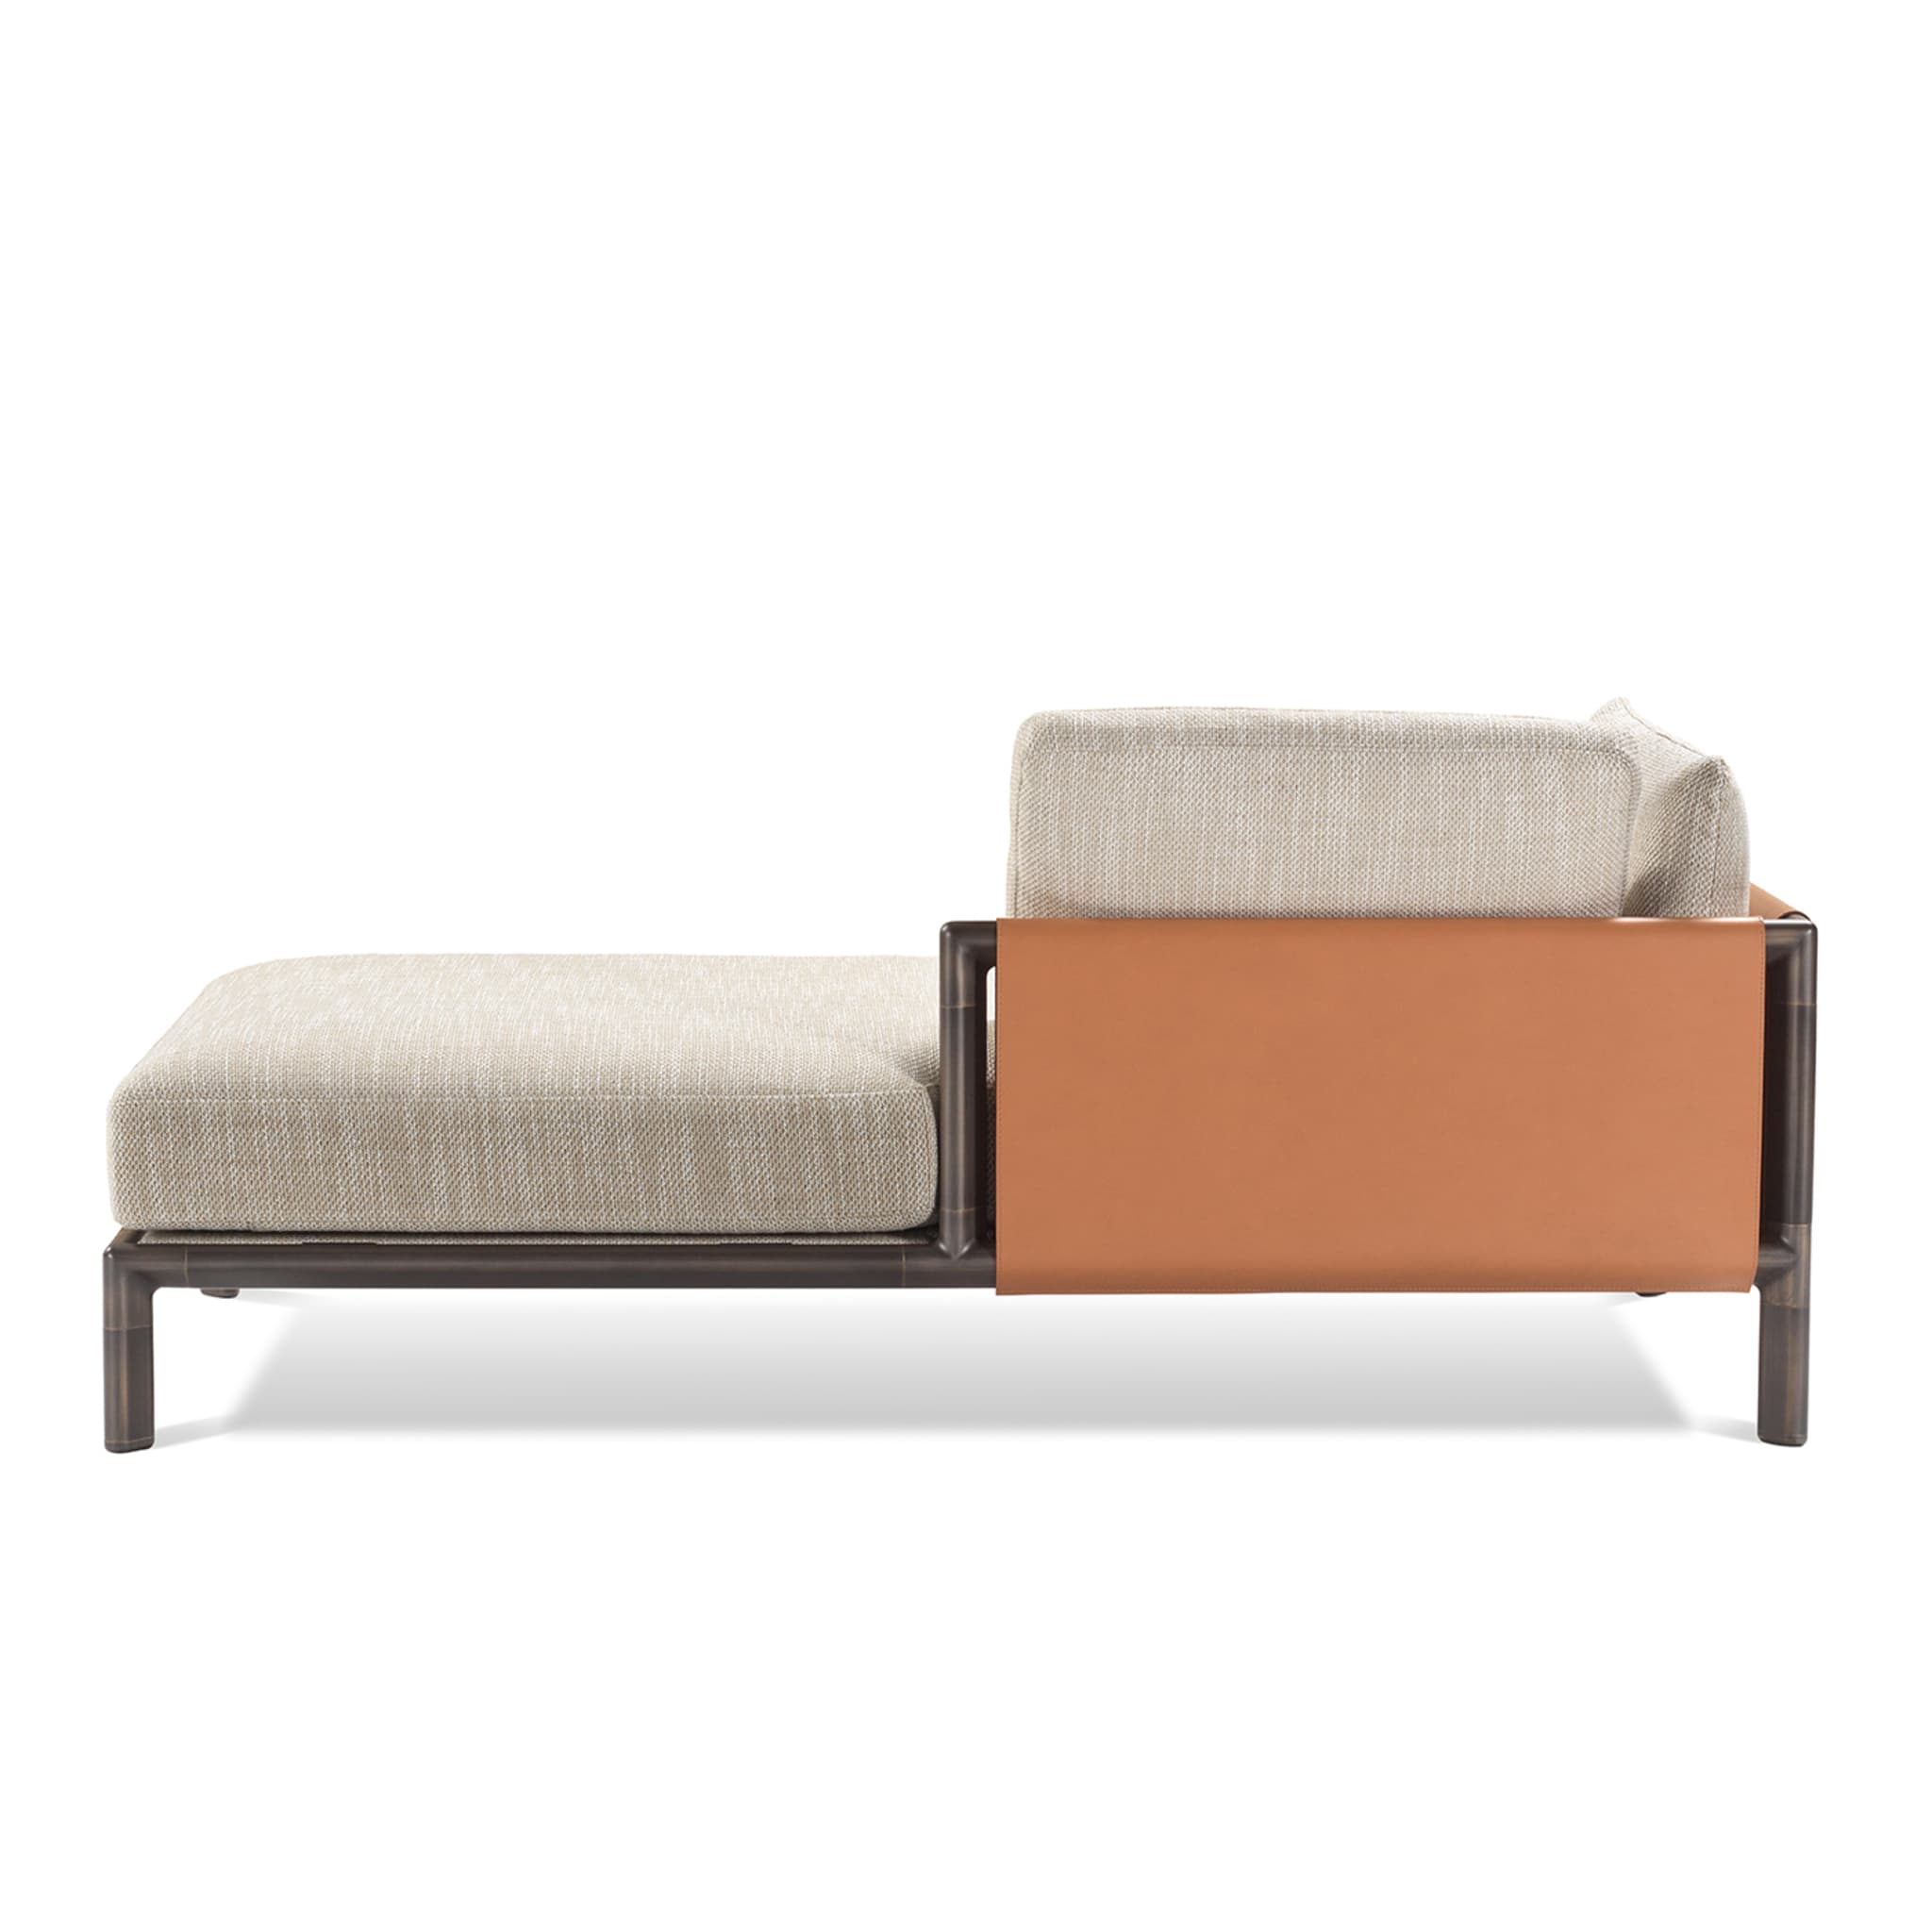 Frame L-Shaped Chaise Longue - Alternative view 2